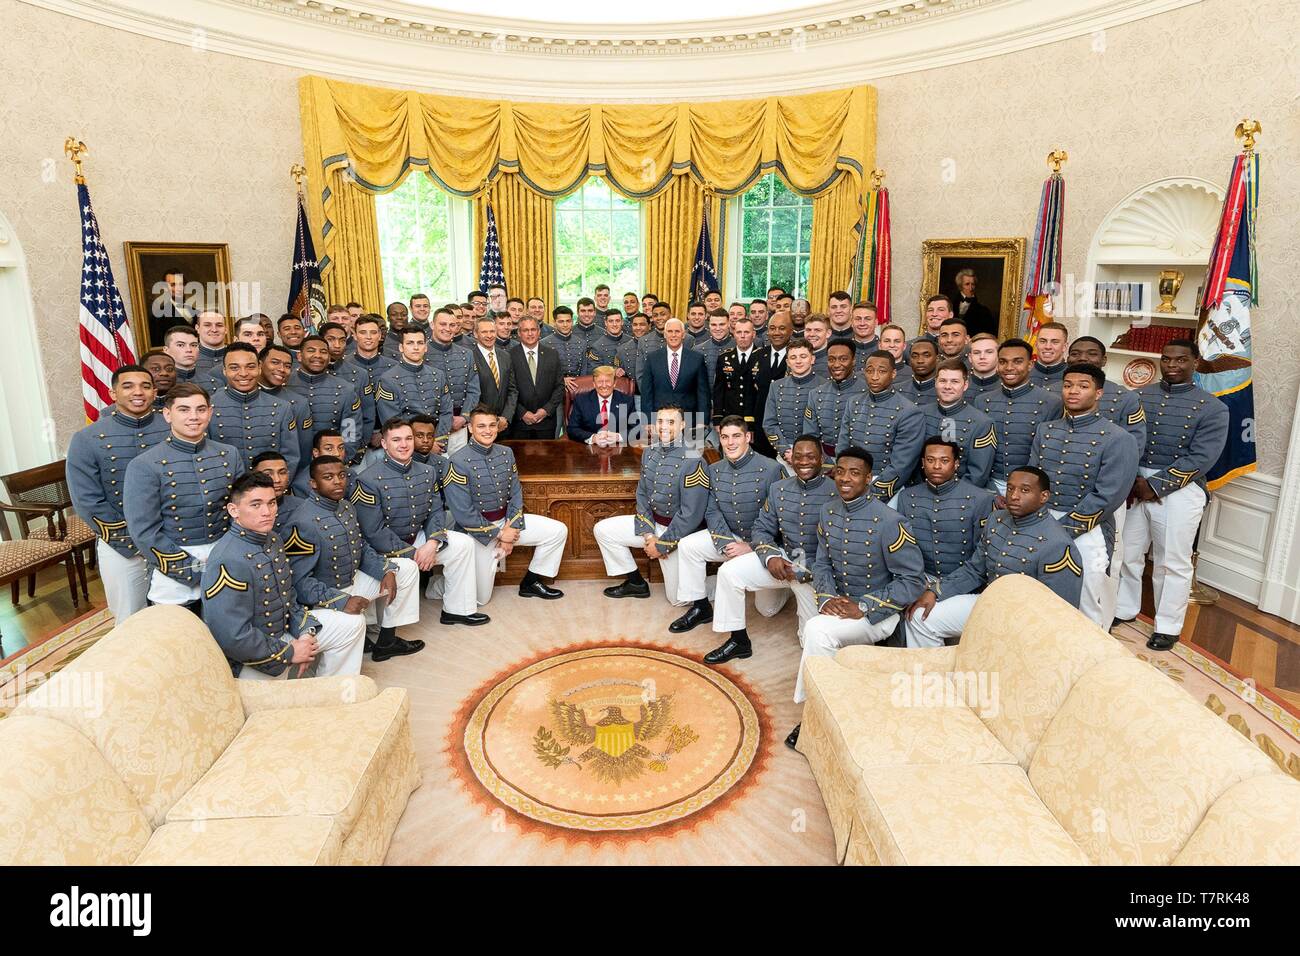 U.S President Donald Trump and Vice President Mike Pence poses for photos with members of the Army Black Knights, the U.S. Military Academy football team in the Oval Office in the White House May 6, 2019 in Washington, DC. Stock Photo